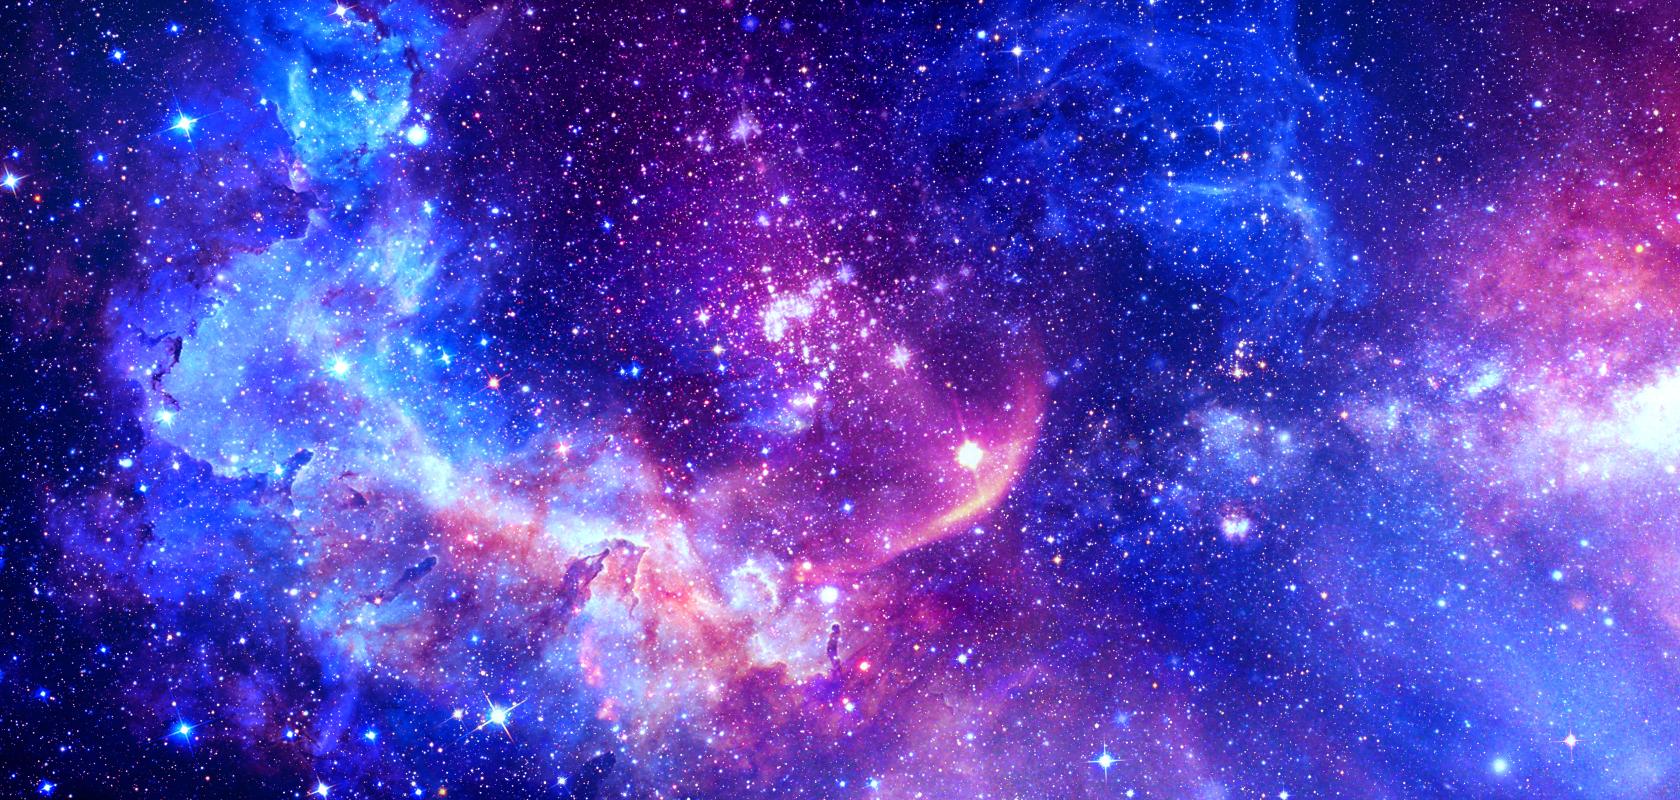 An image of a galaxy